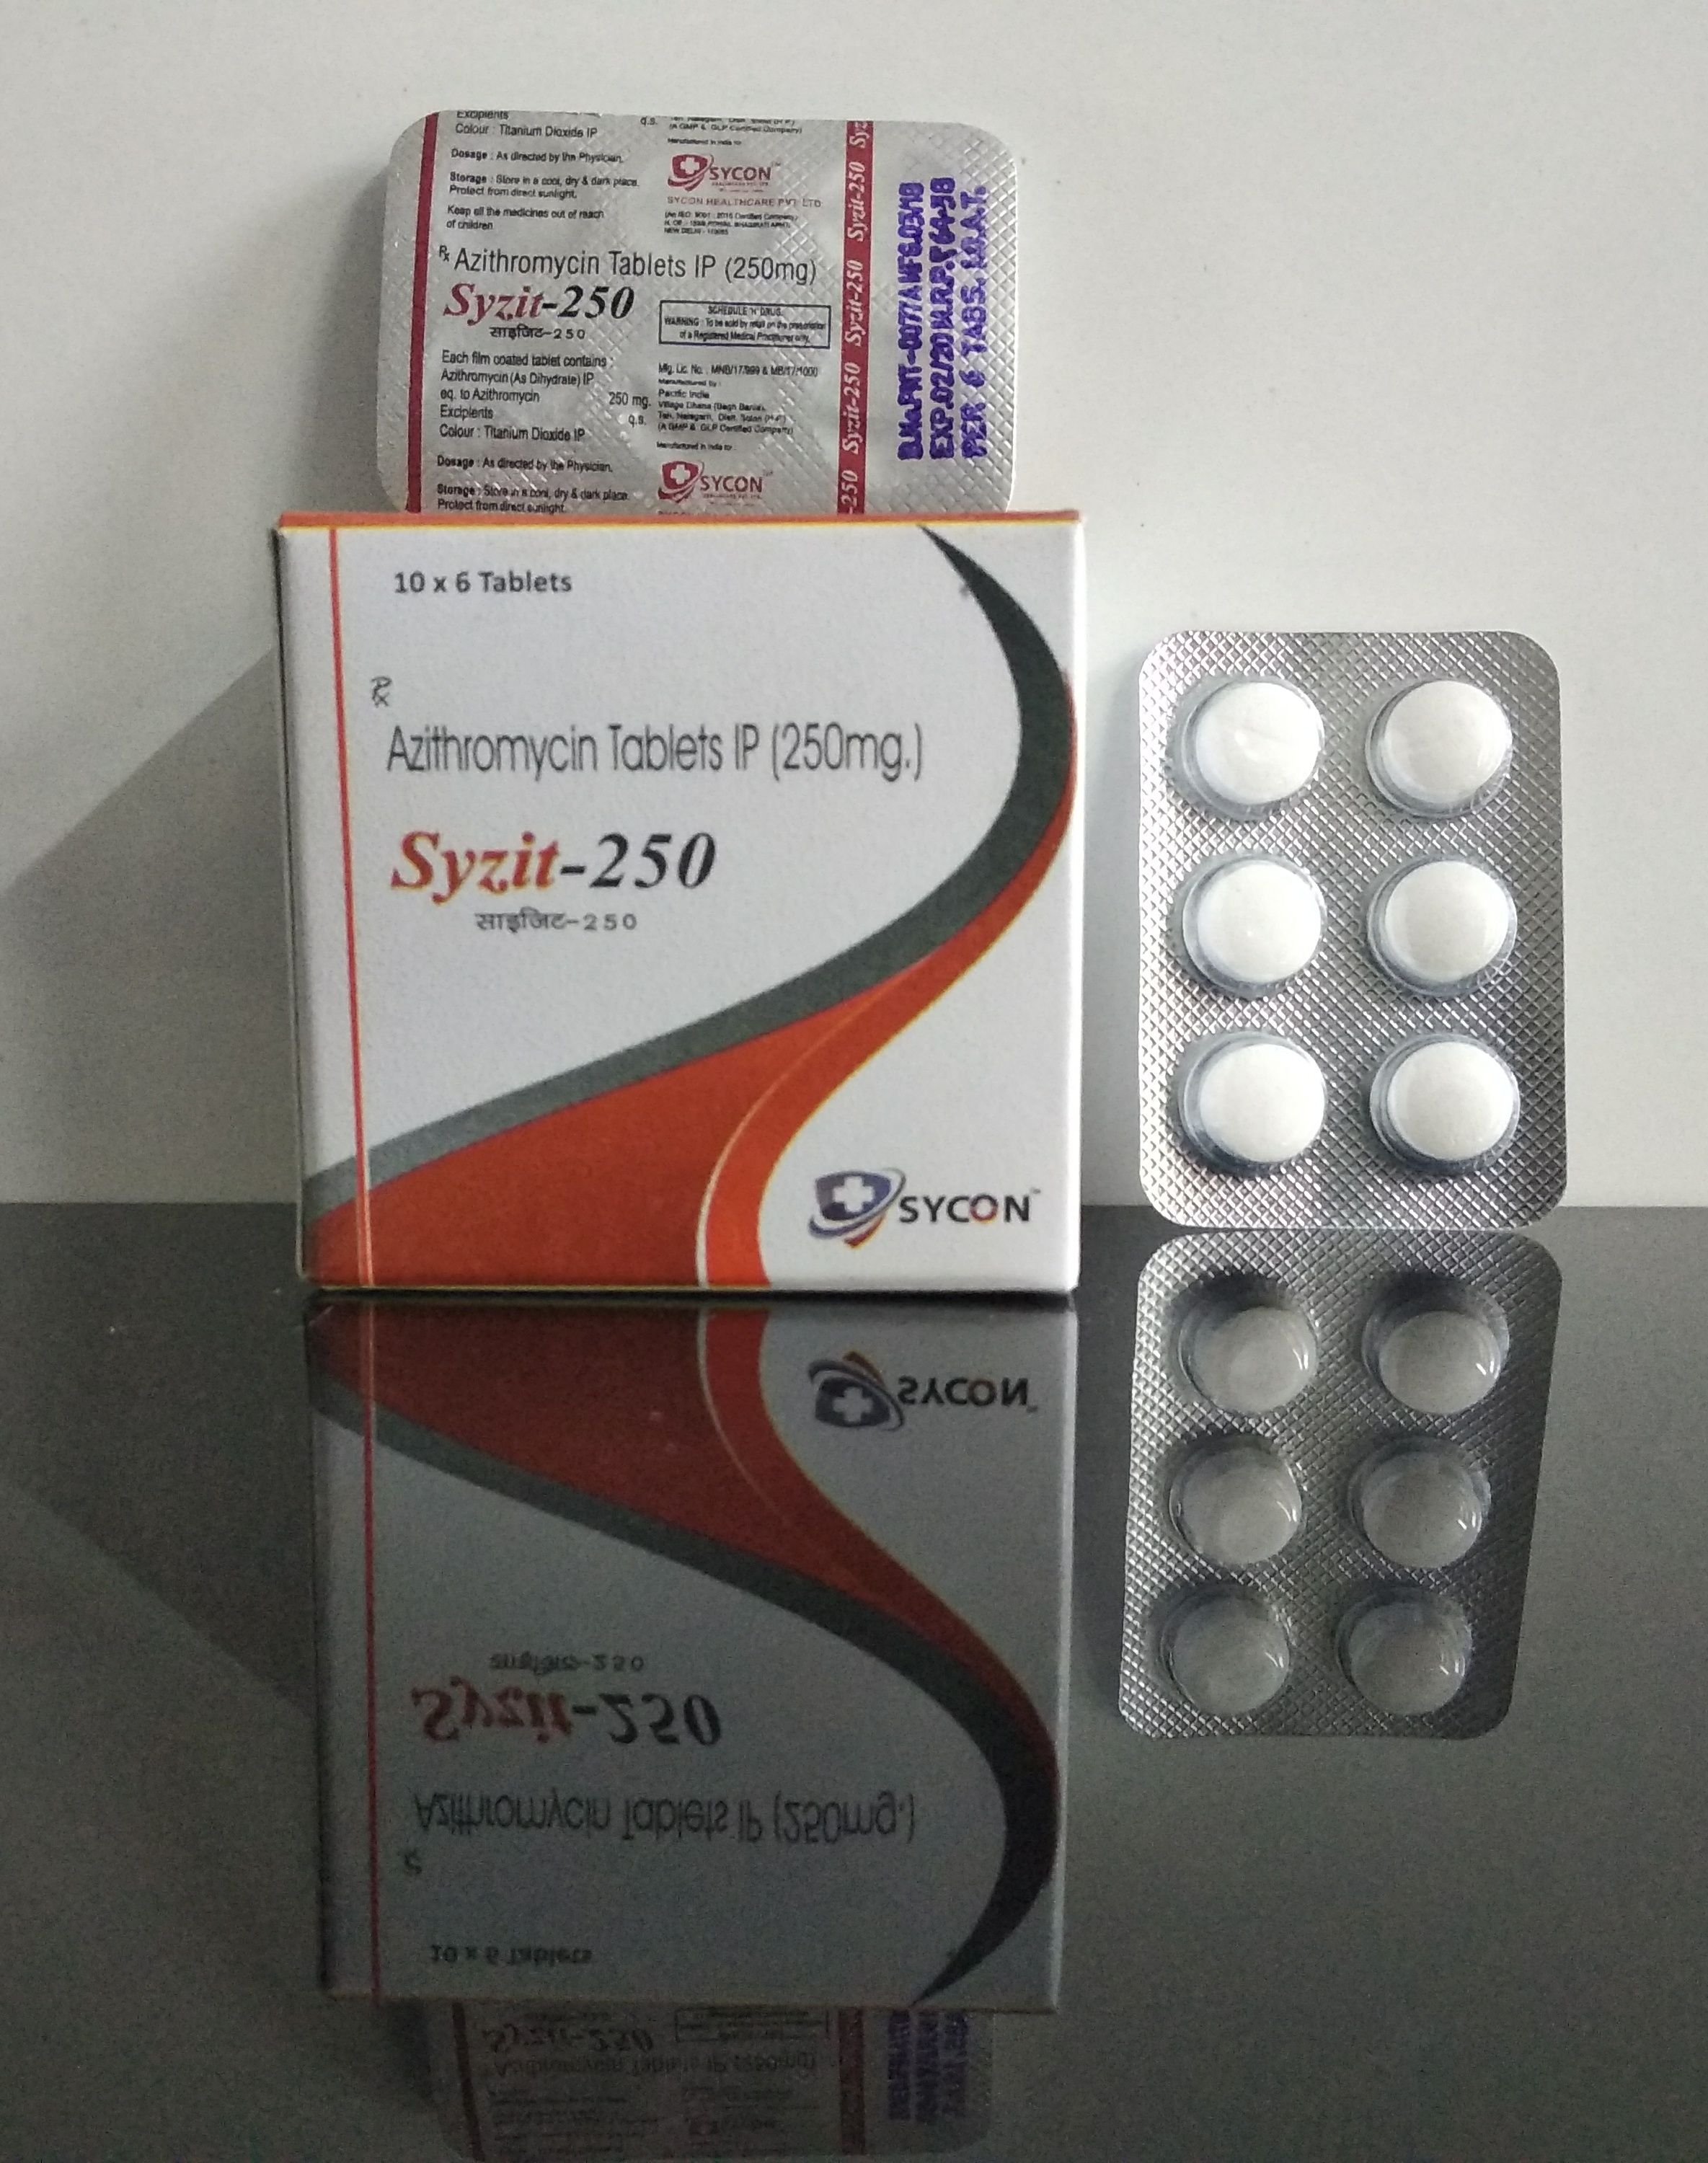 Azithromycin 250 mg Tablet Supplier and Distributor from